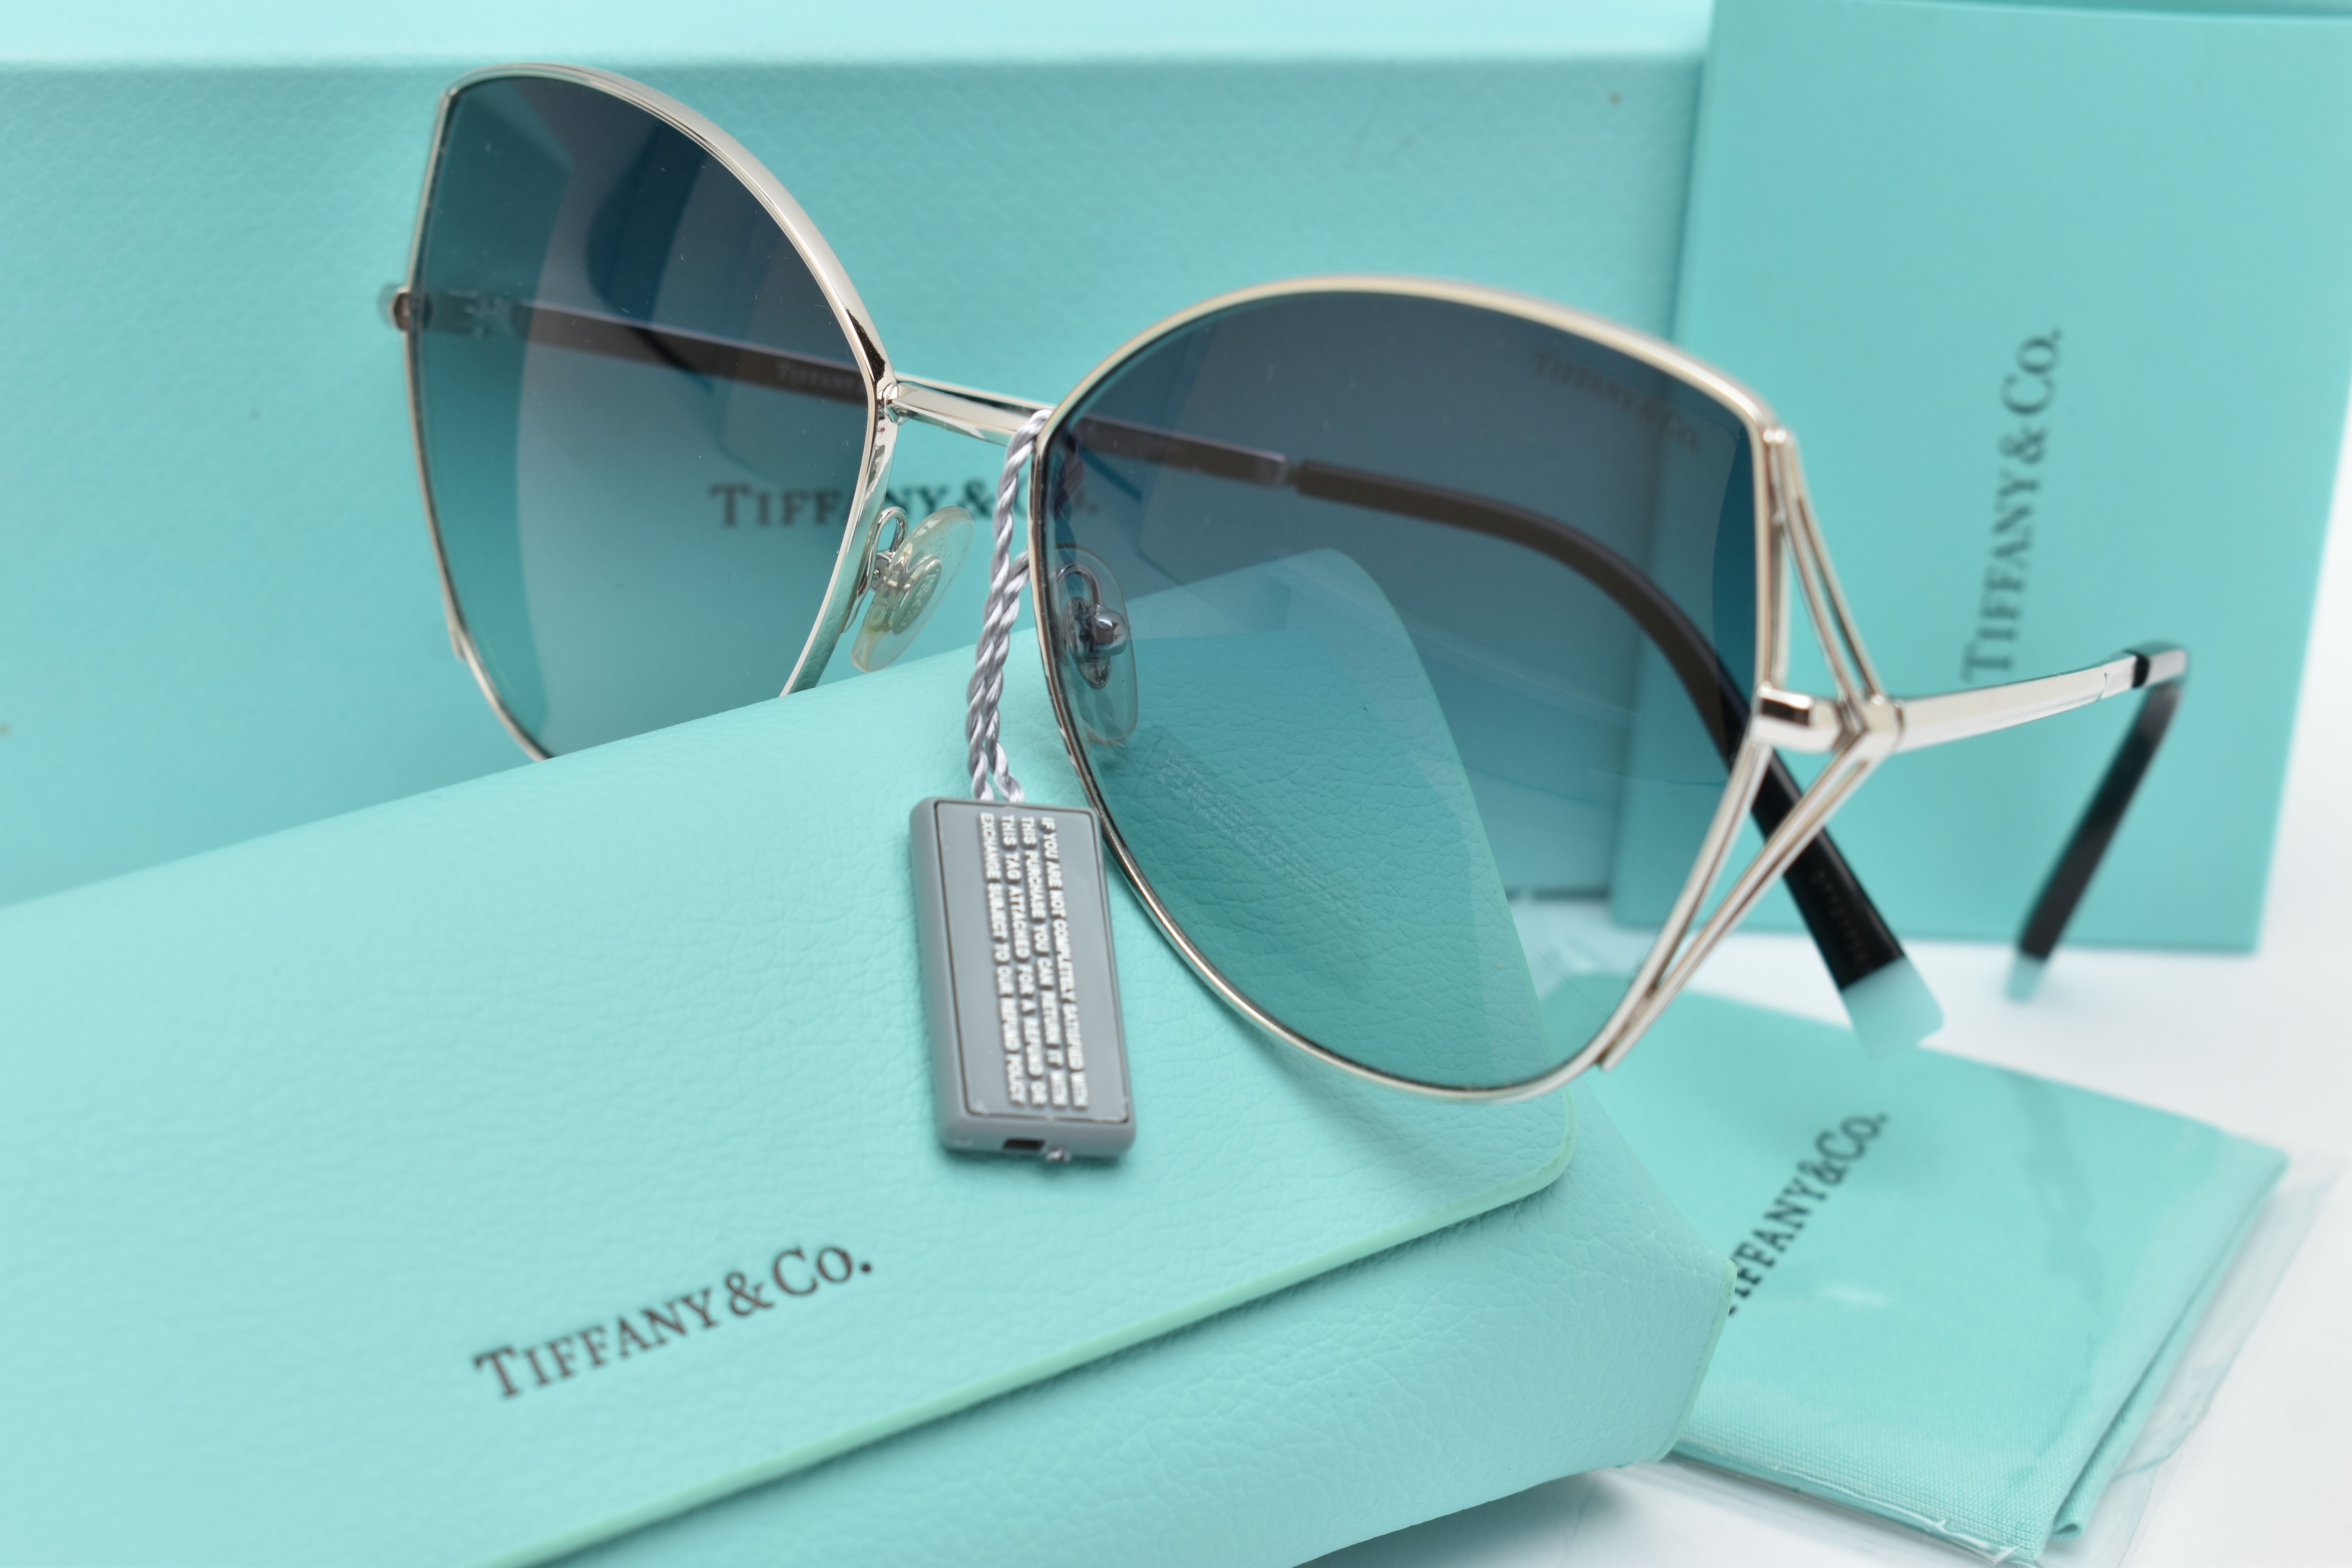 A PAIR OF 'TIFFANY & CO' SUNGLASSES, a pair of butterfly style TF3072 sunglasses, together with - Image 4 of 4